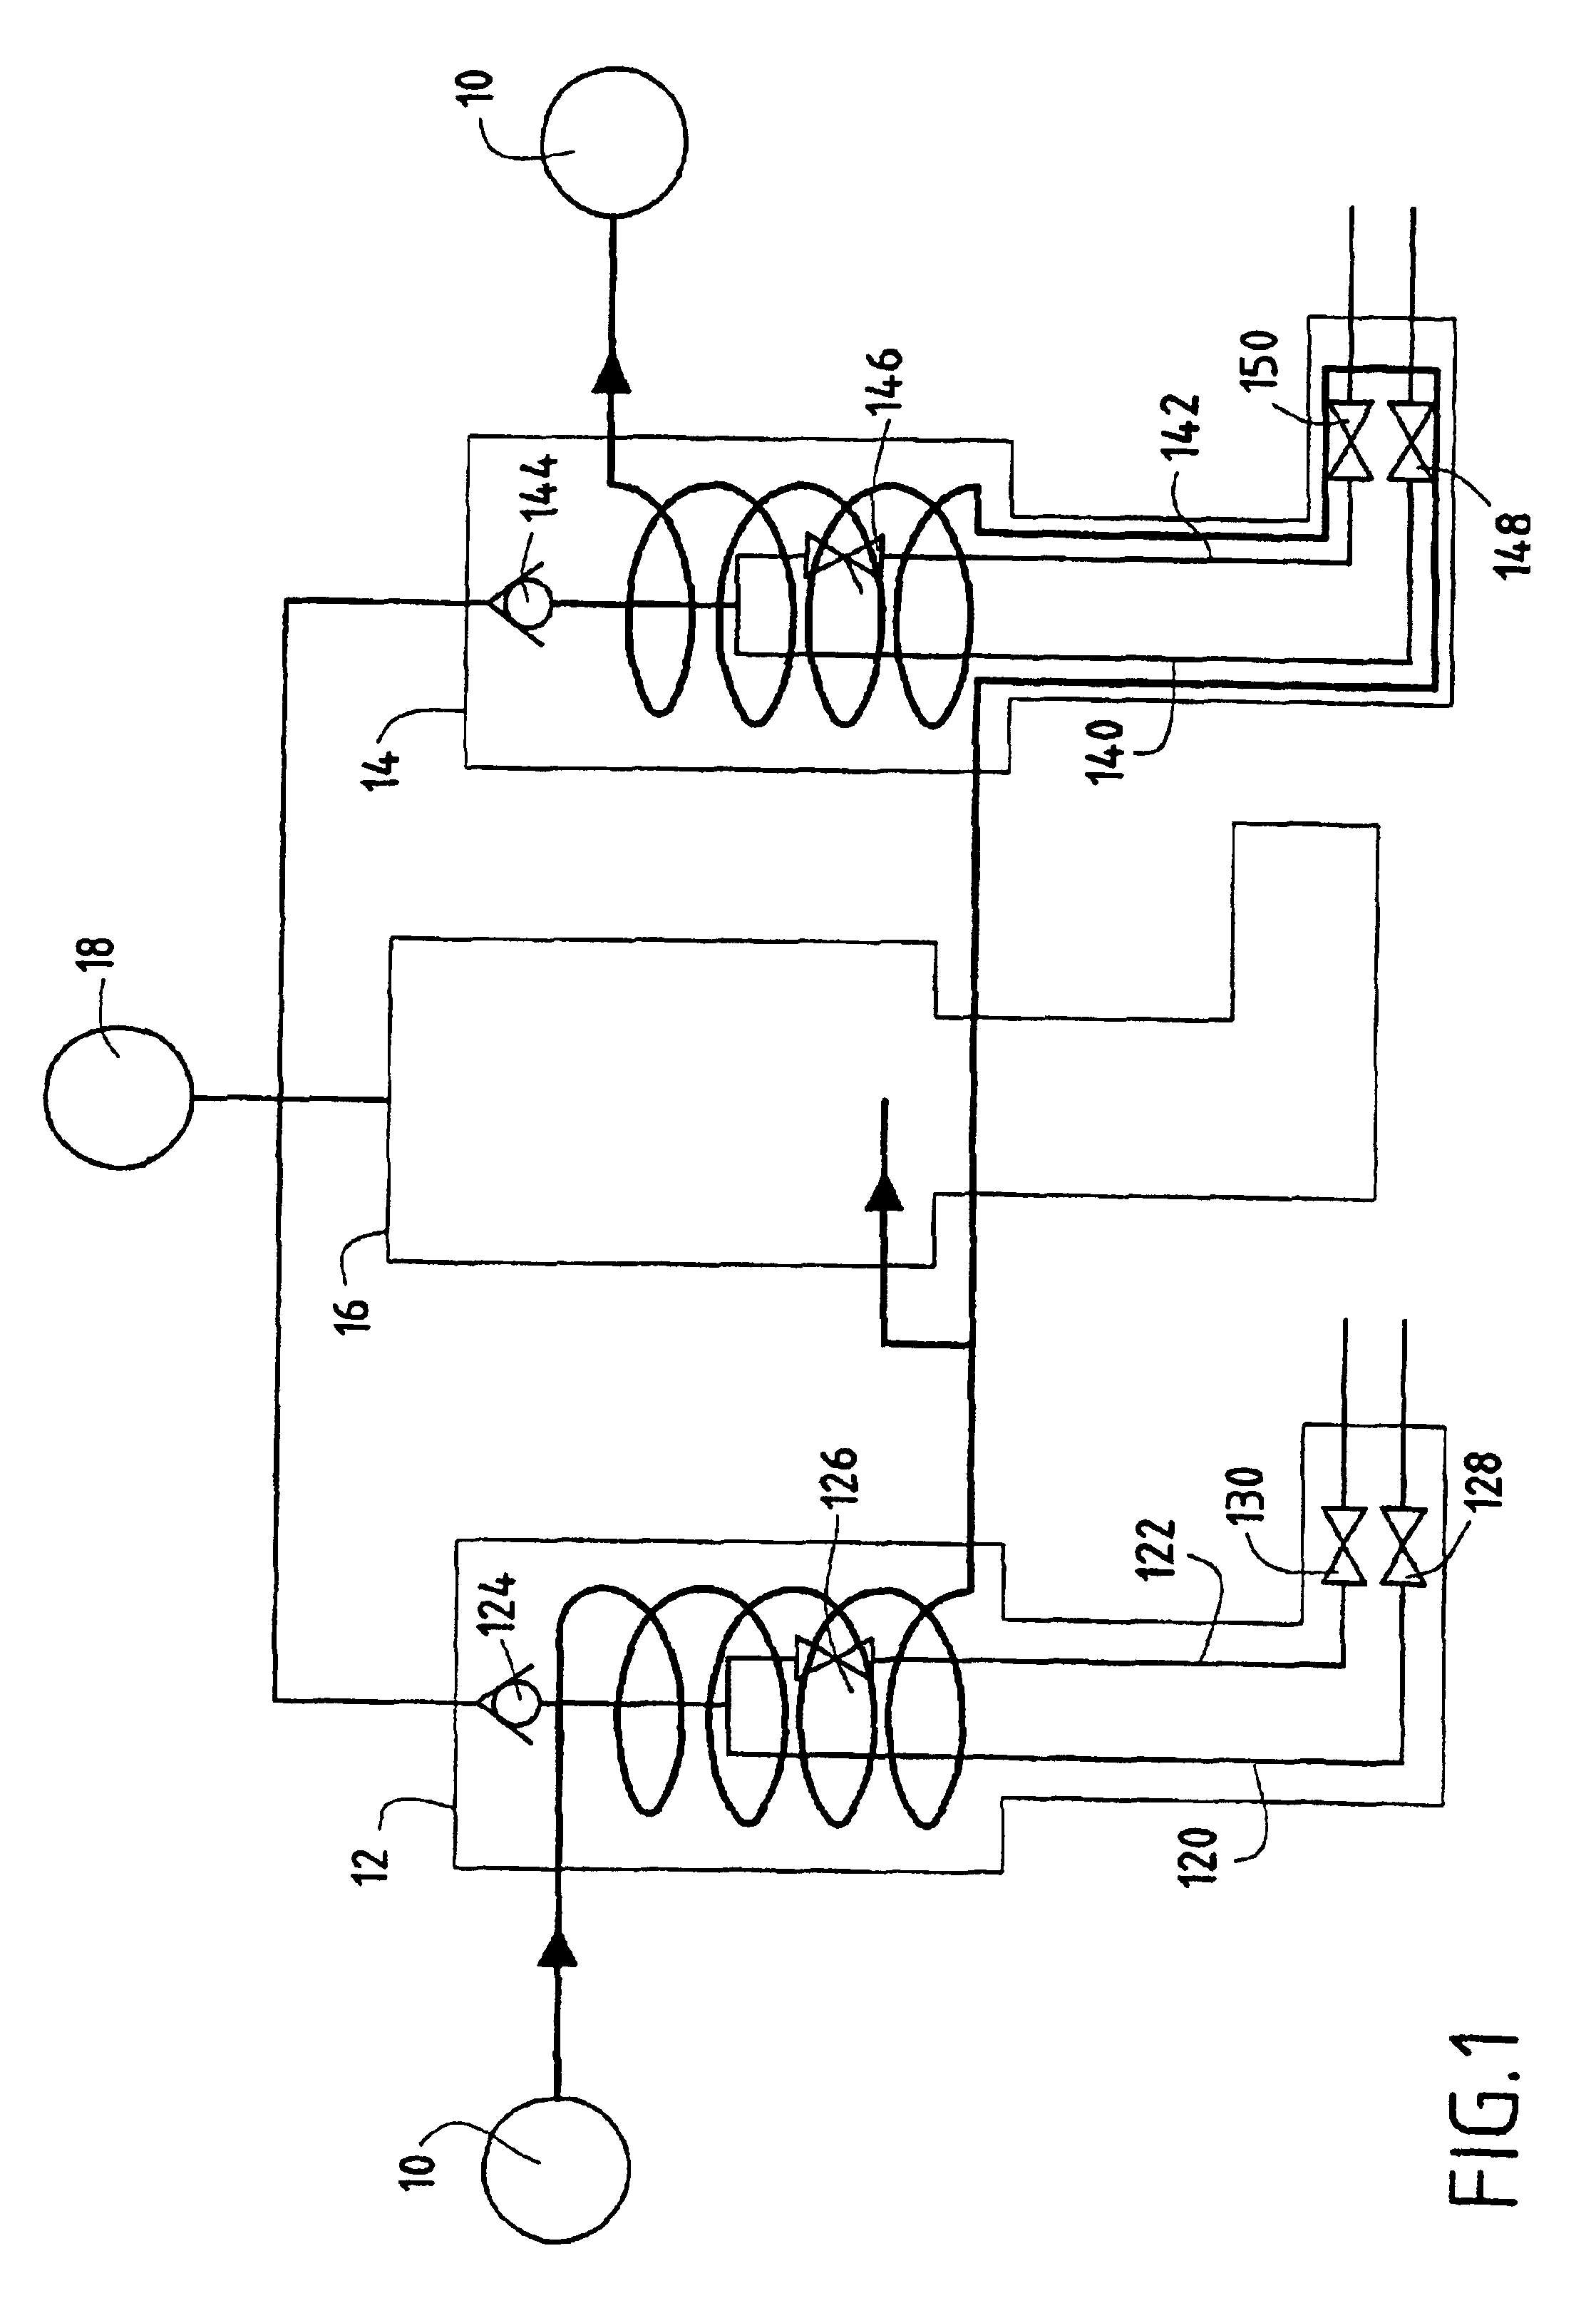 Full cooling of main injectors in a two-headed combustion chamber